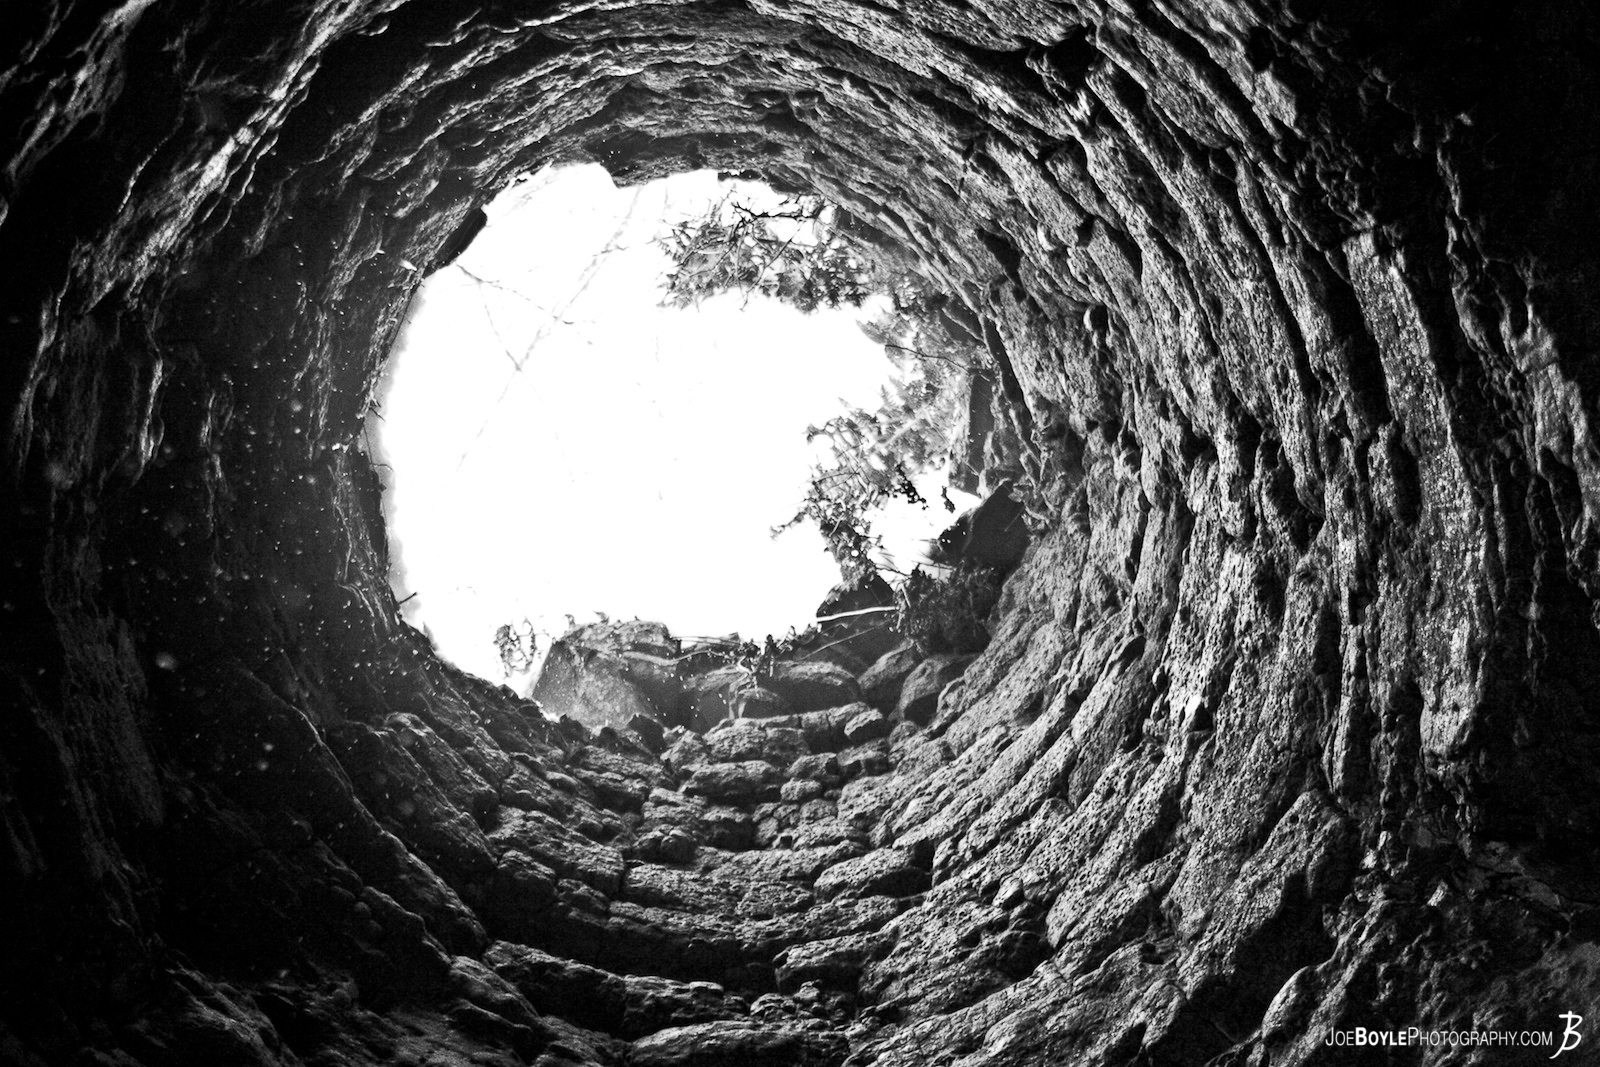  Looking up through the Chimney of an Old Iron Ore Furnace. While hiking a trail in PA I discovered this old Iron Ore Furnace. It was used during the 1900s and has been left to erode itself into a pile of romantic rubble. 